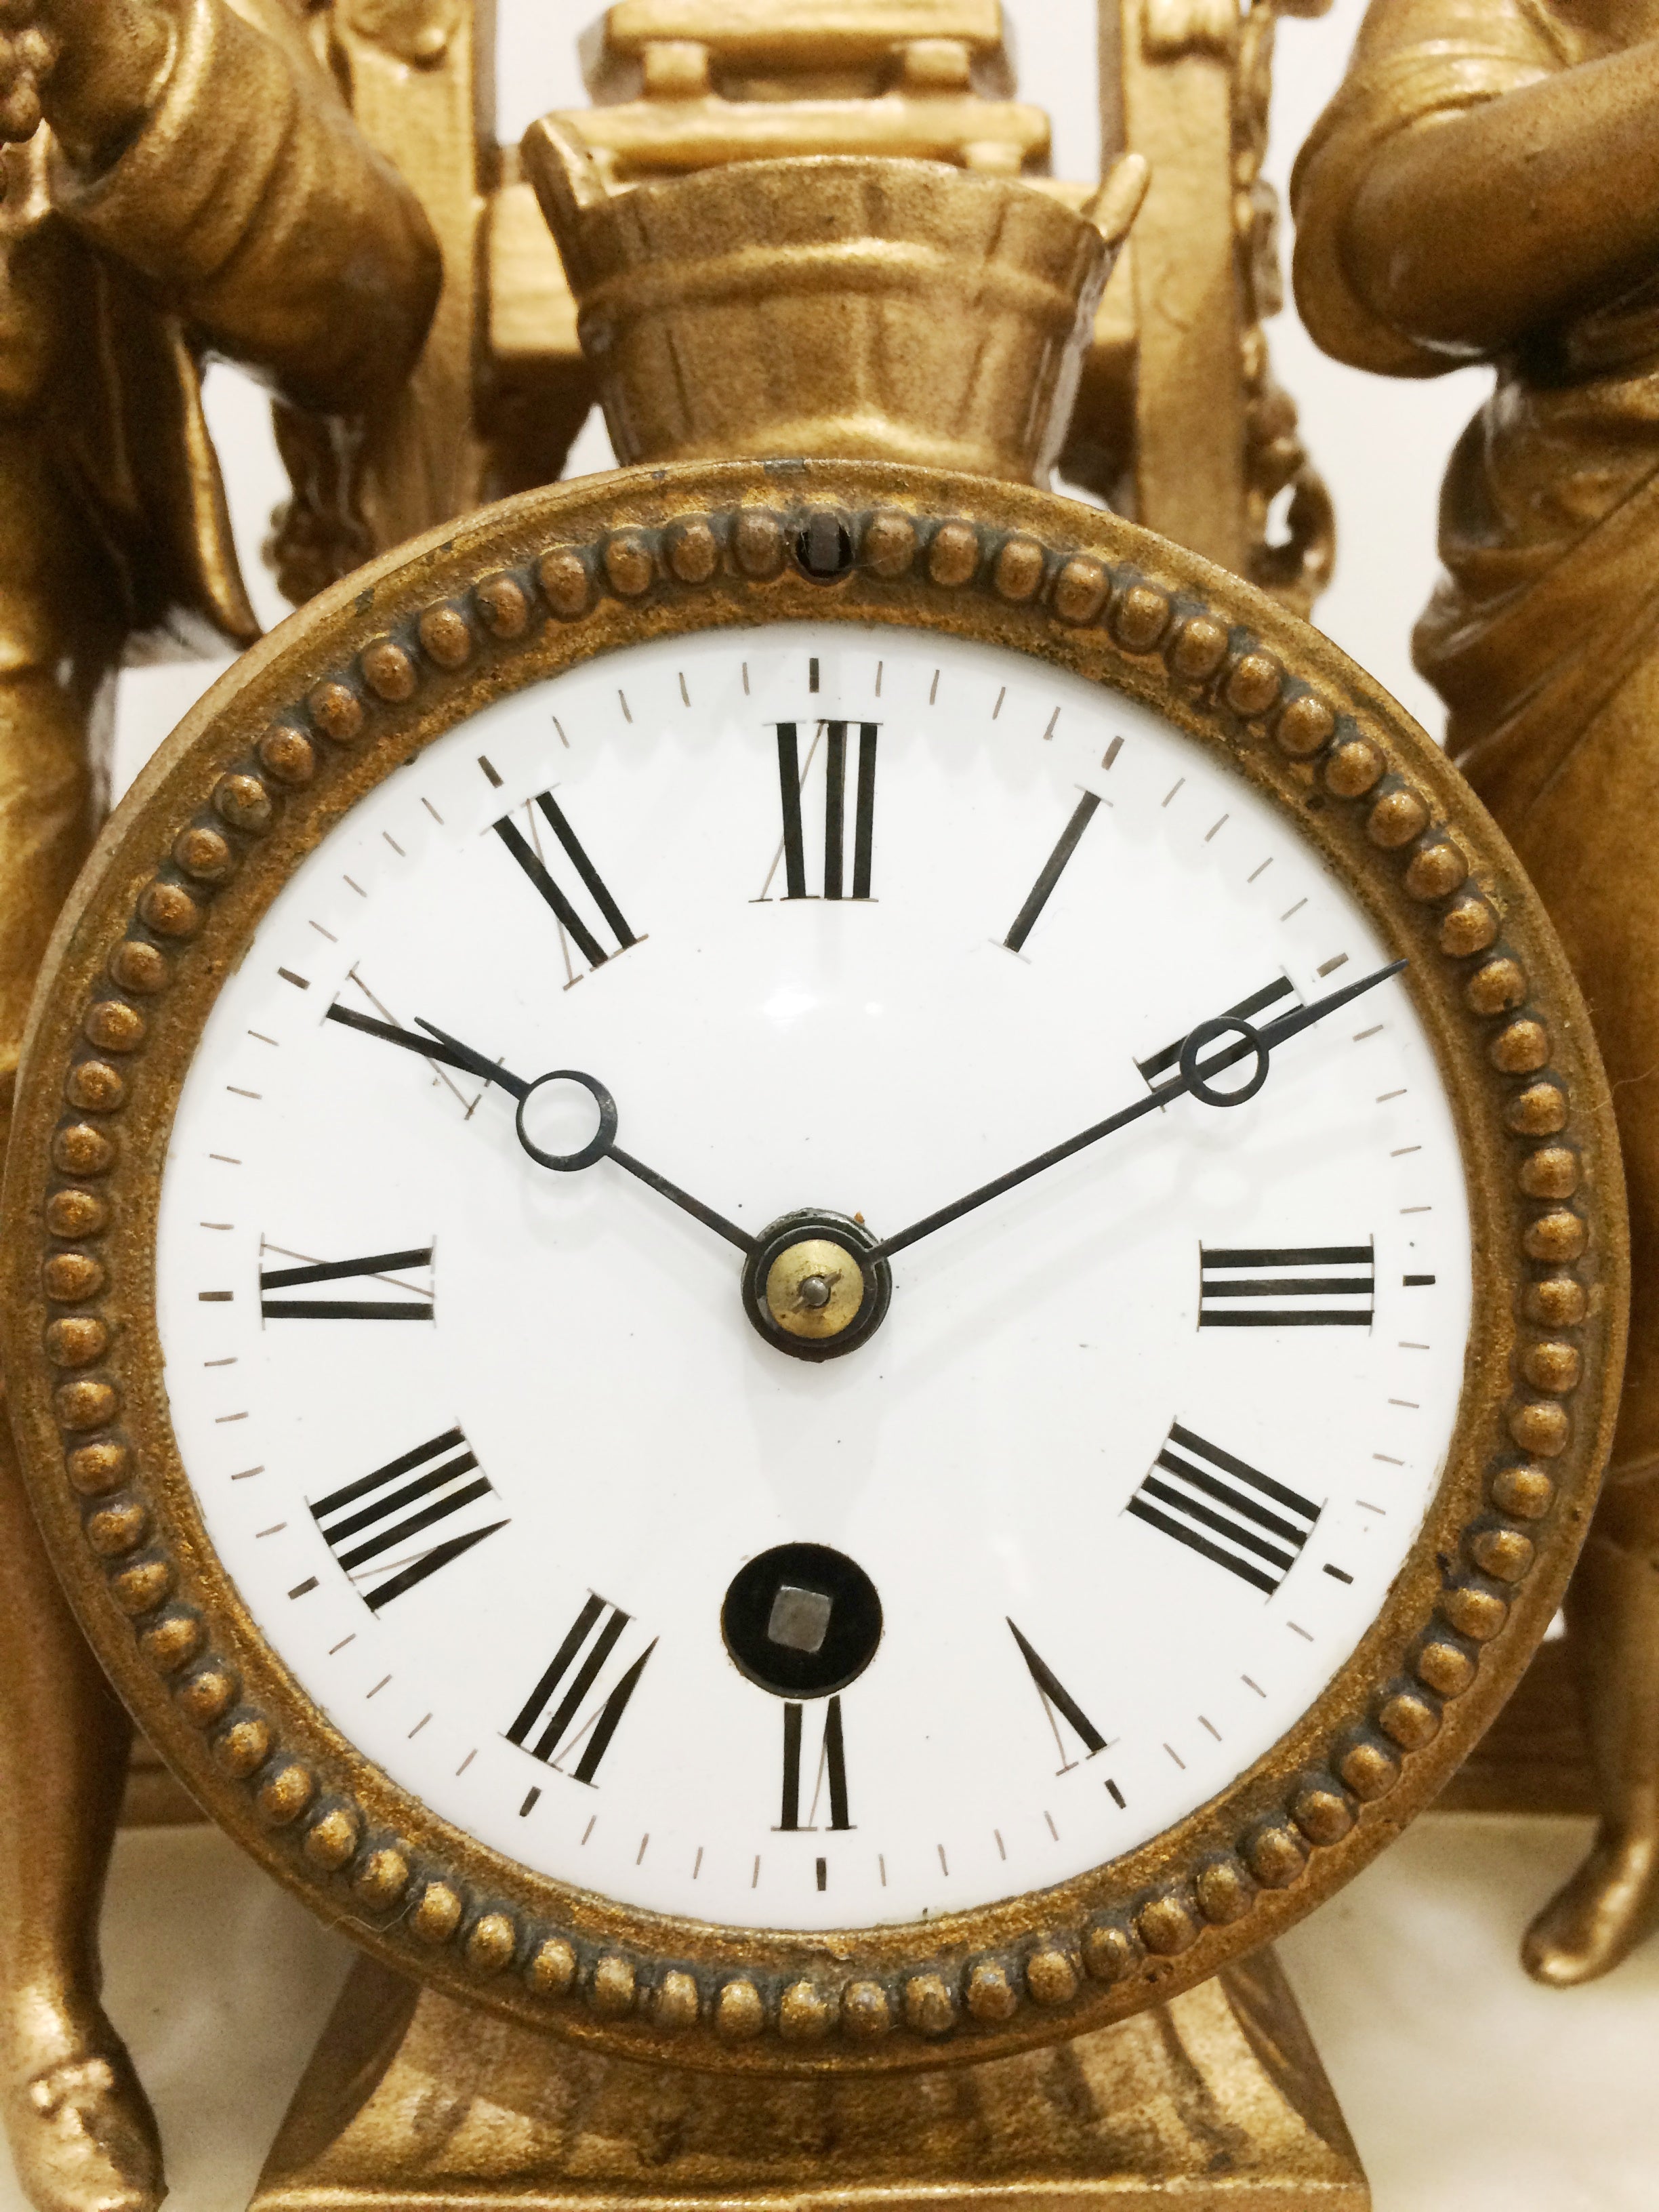 Antique French Spelter Mantel Clock | eXibit collection